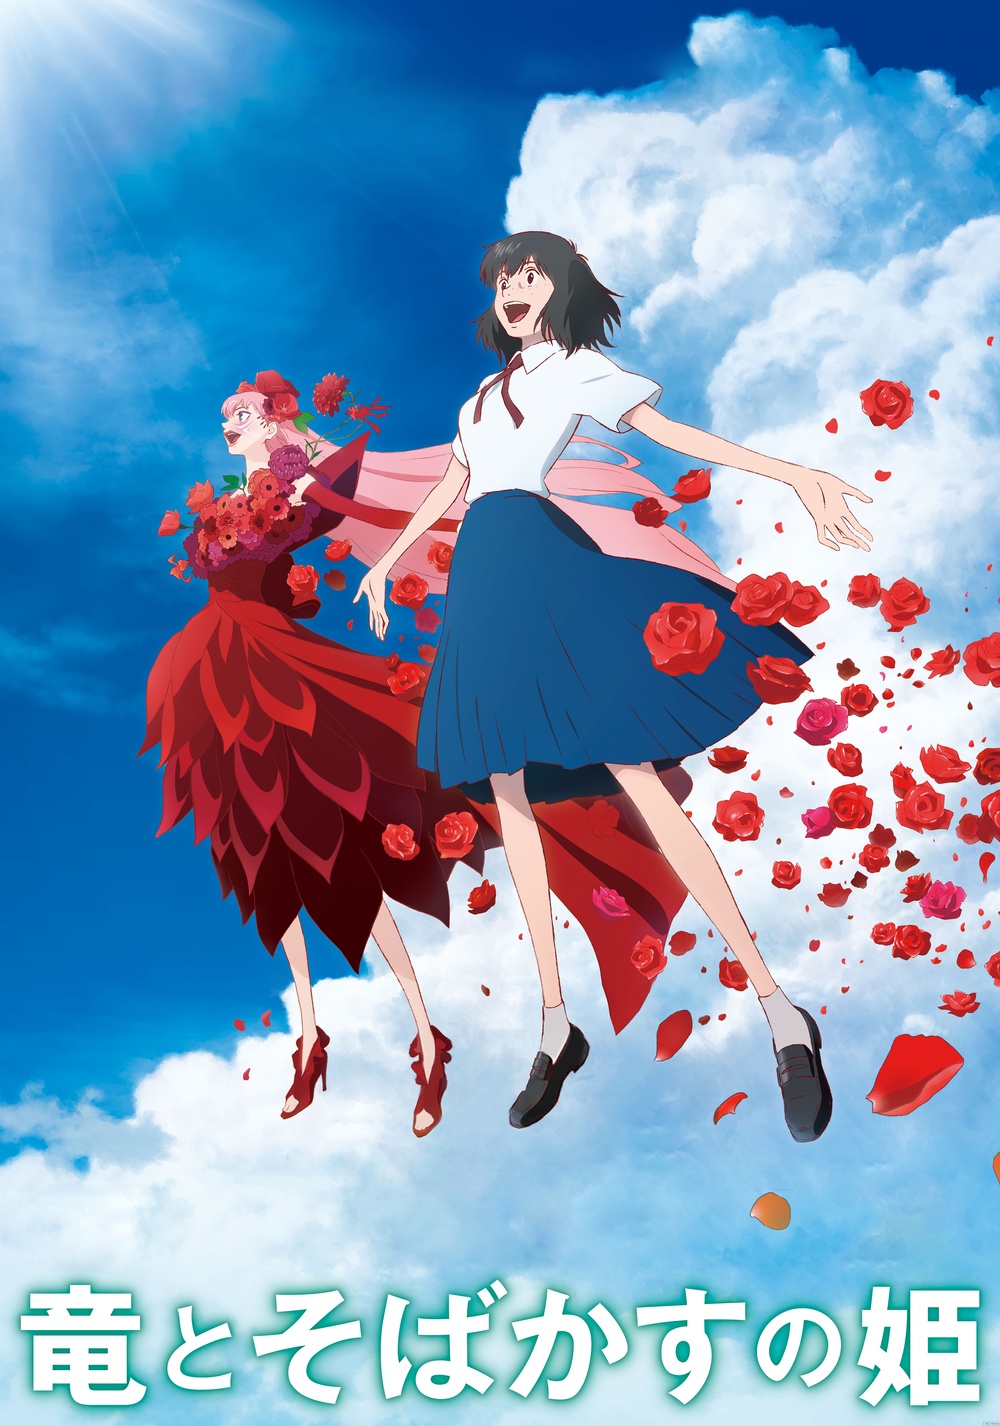 English Edition Of The Soundtrack For the Anime Film BELLE is Out Now —  GeekTyrant